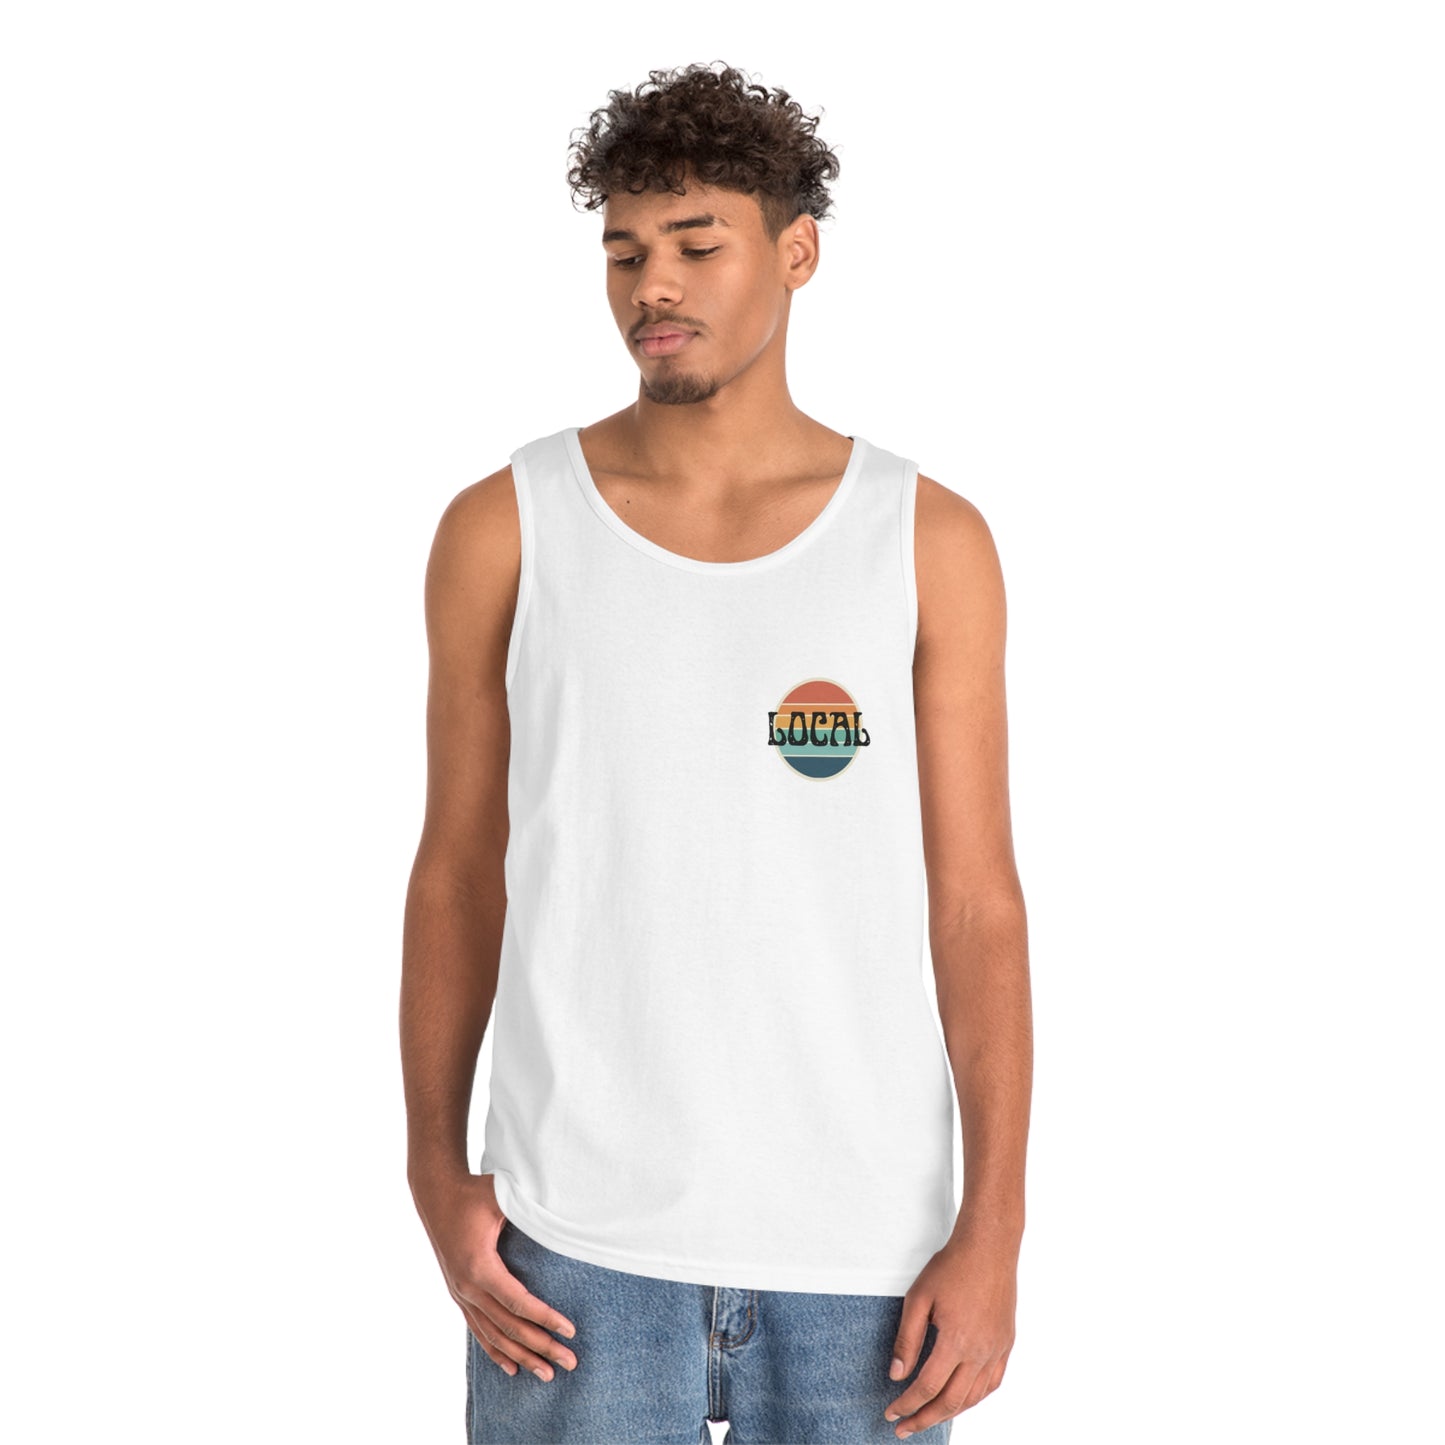 Respect the Locals unisex tank top - 2 colors available